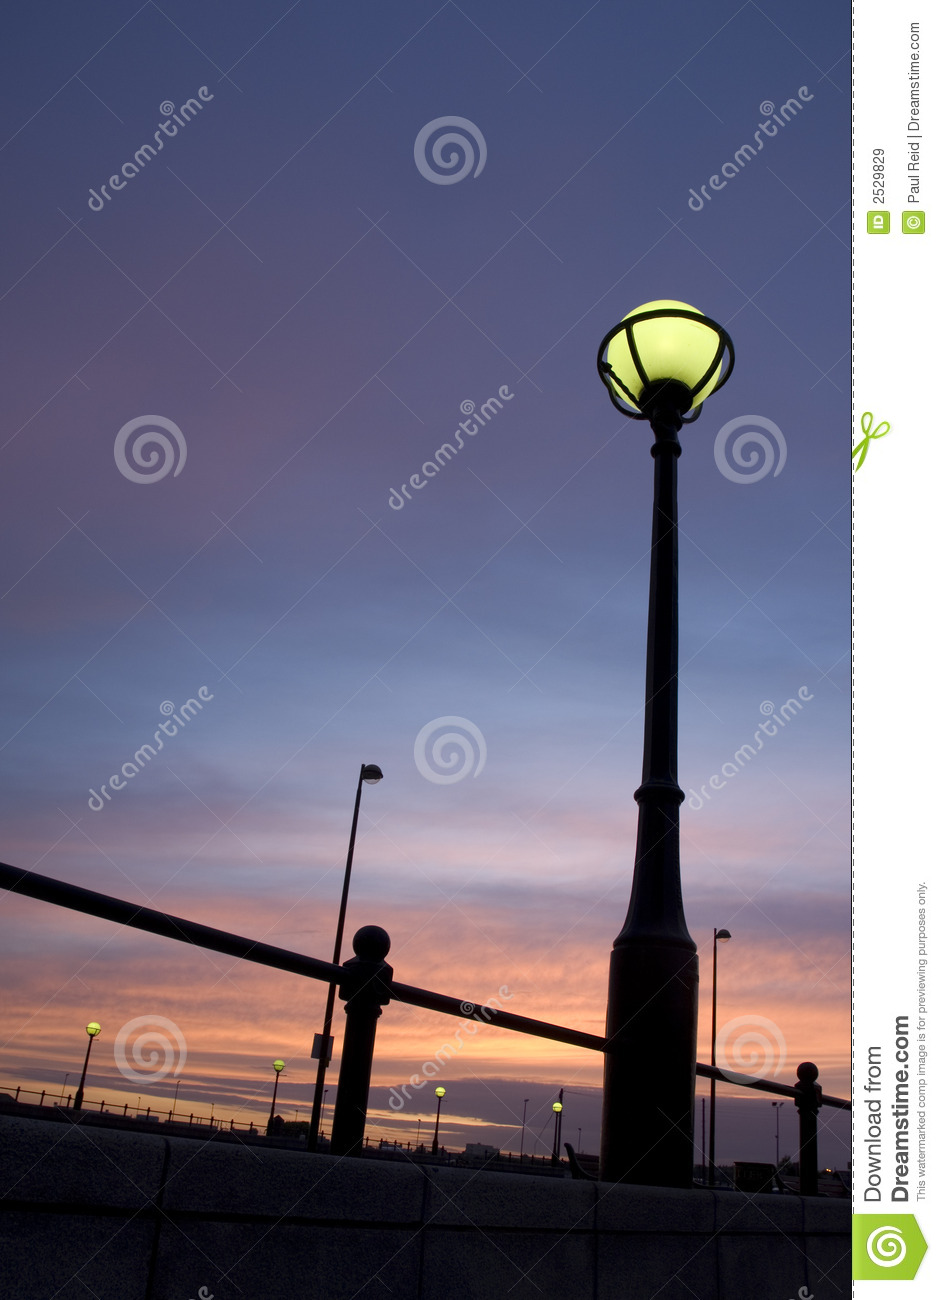 Street Lamp At Sunset Royalty Free Stock Images   Image  2529829